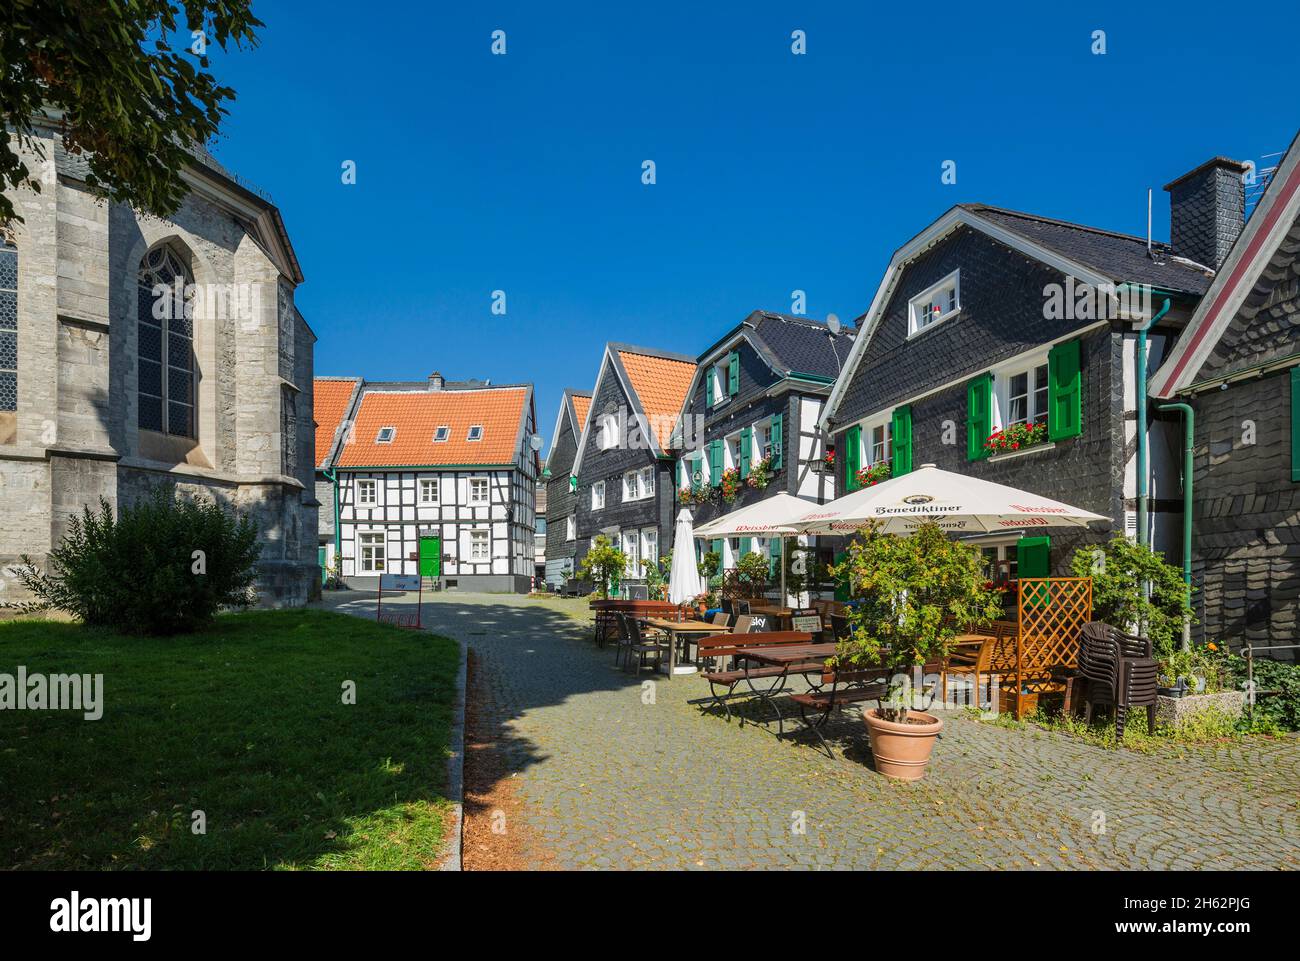 germany,wuelfrath,bergisches land,niederbergisches land,niederberg,rhineland,north rhine-westphalia,old town,residential houses on the church square,half-timbered house,houses with slate cladding,green shutters Stock Photo